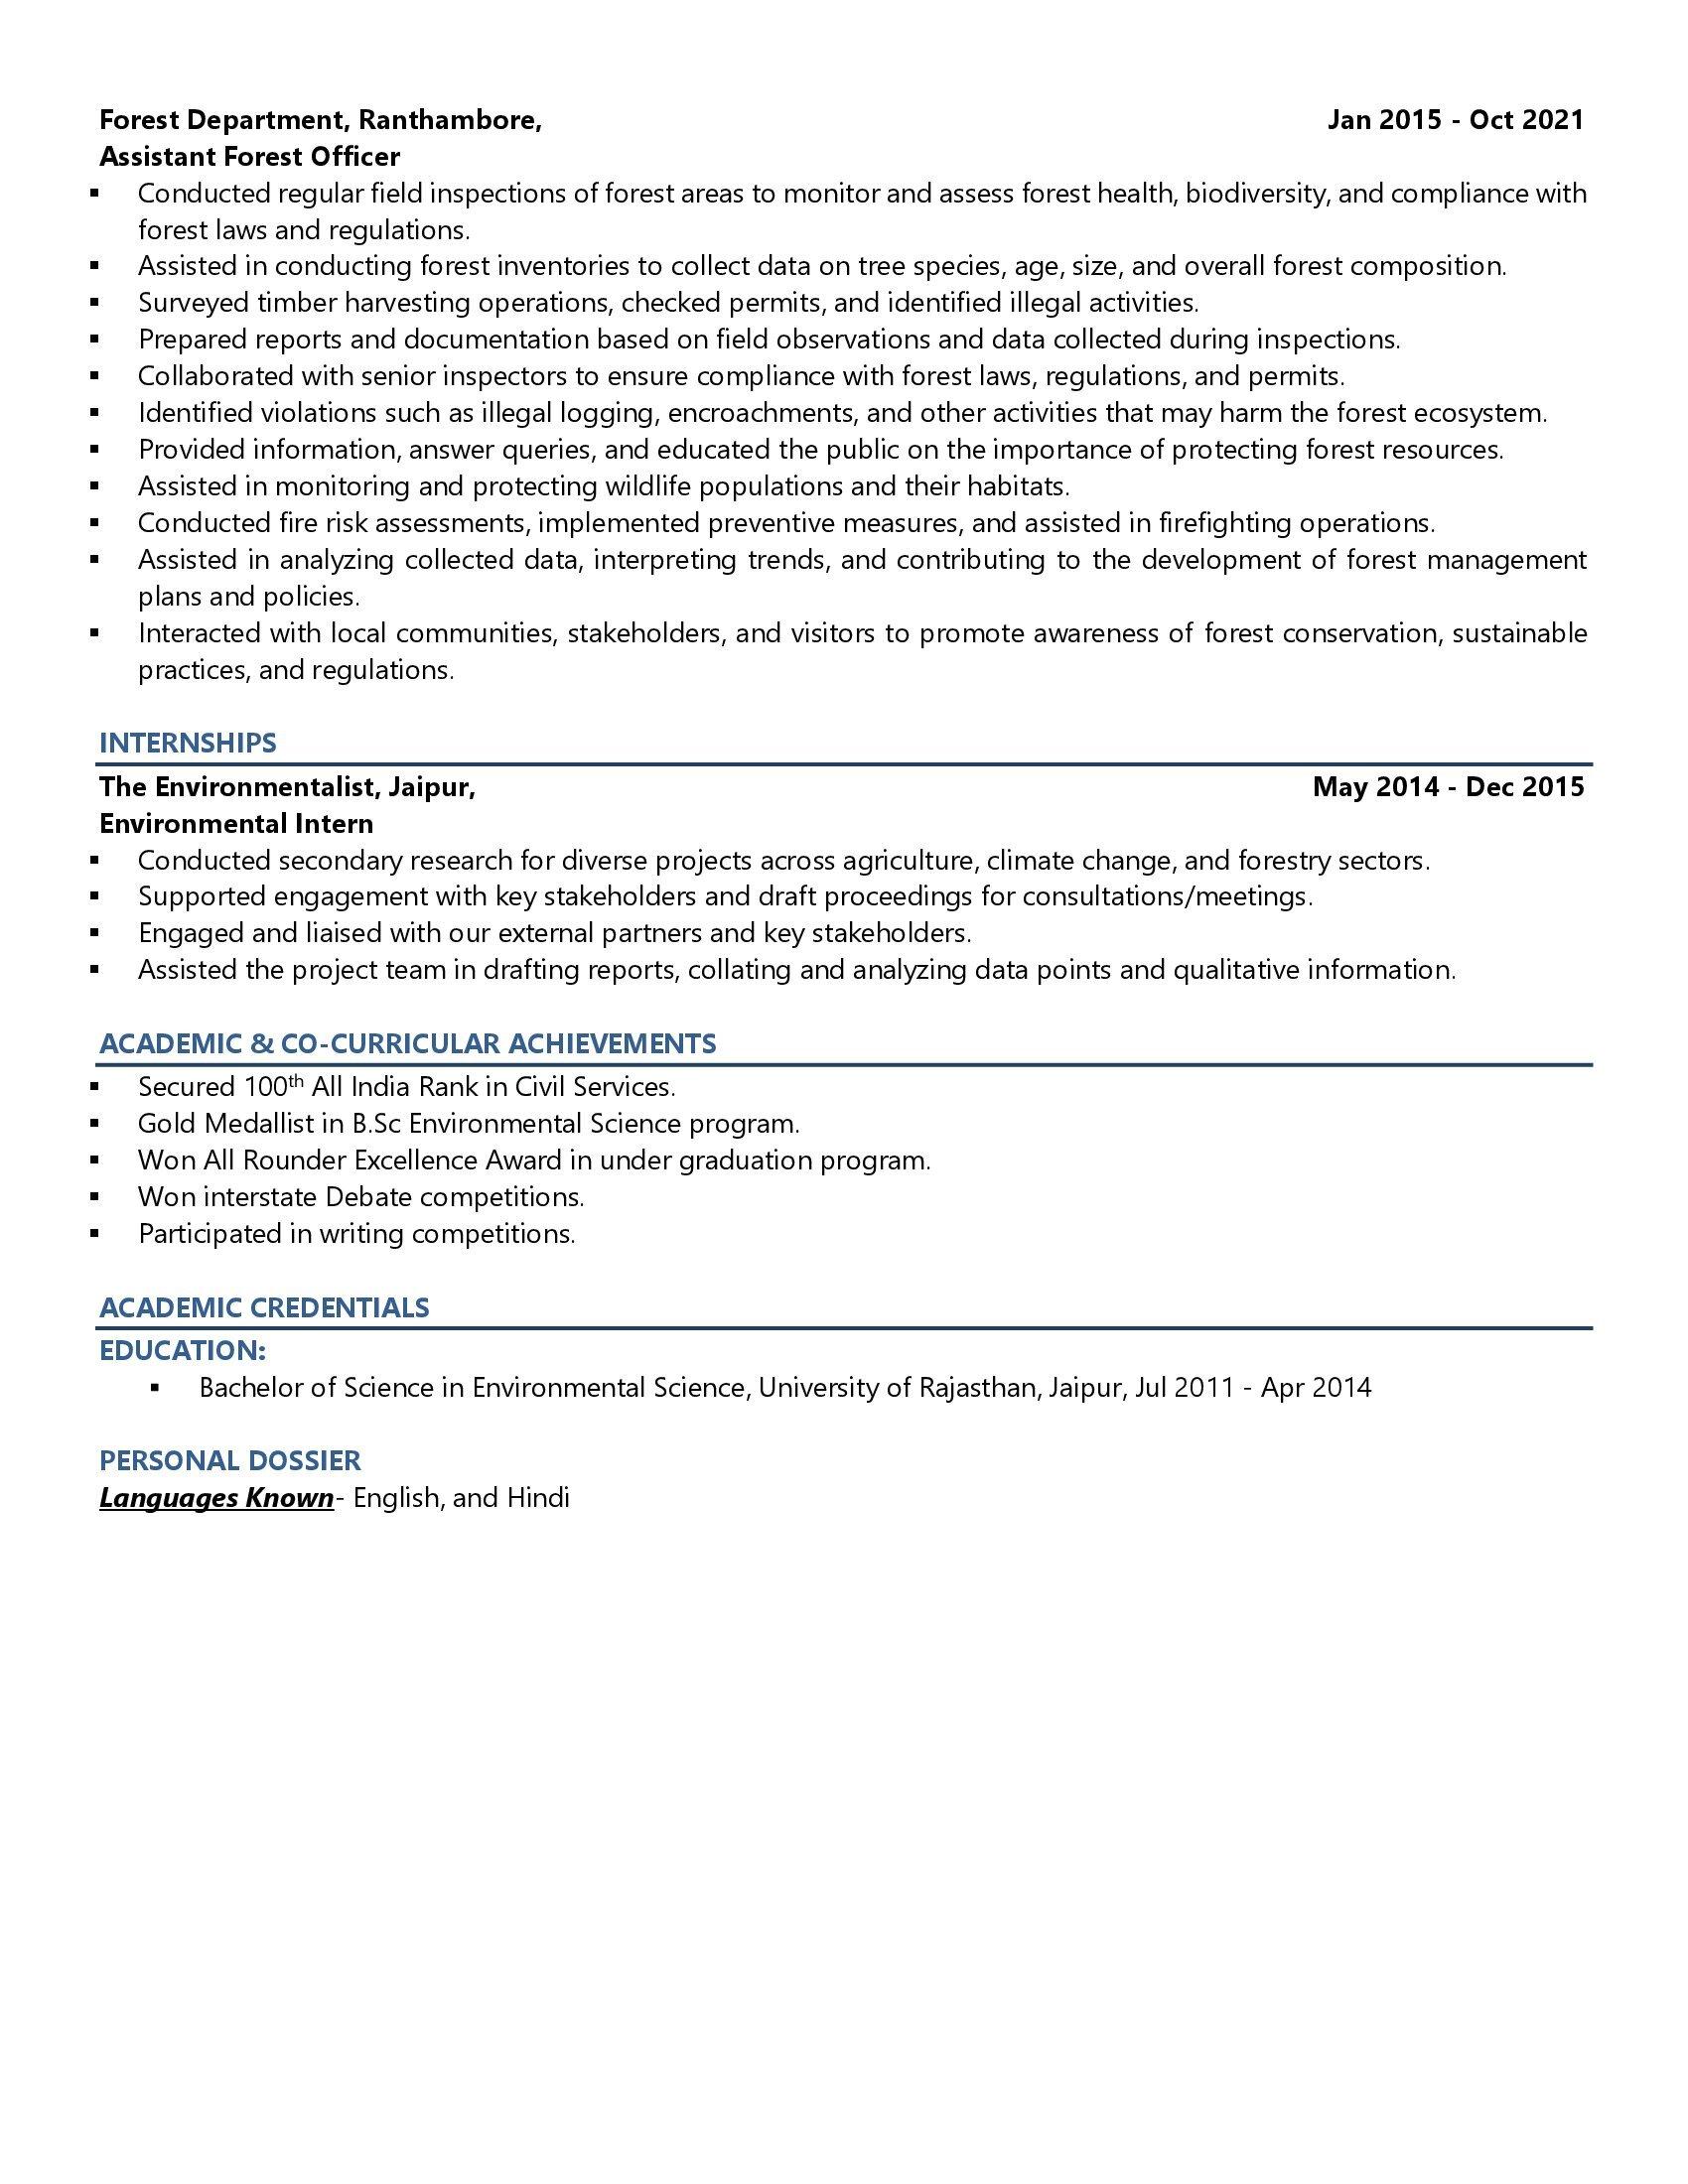 Forest Officer - Resume Example & Template